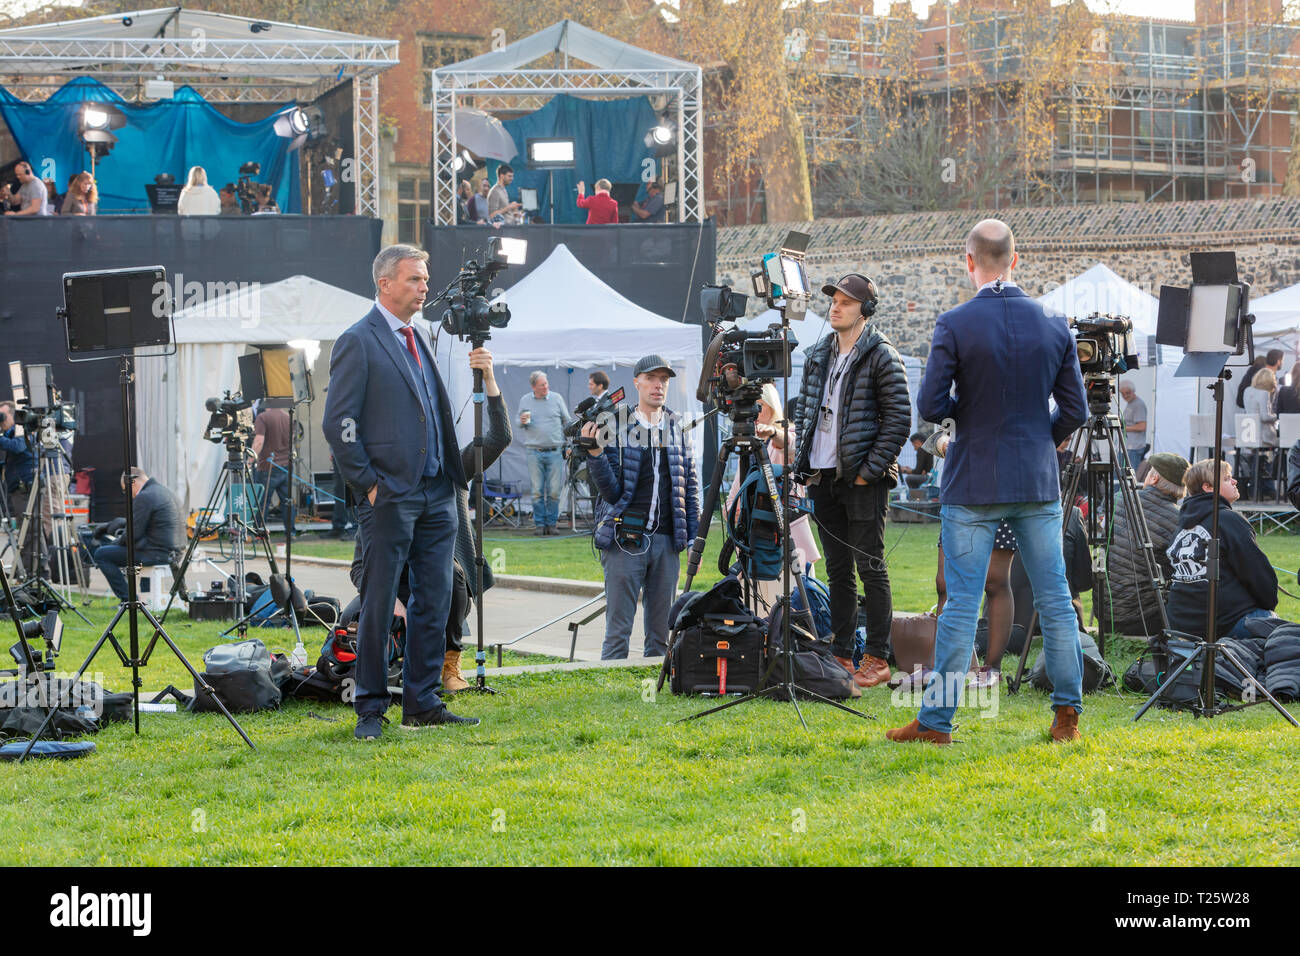 Westminster, London, UK; 29th March 2019; Broadcast Media Congregate With their Equipment on College Green Opposite Houses of Parliament Stock Photo